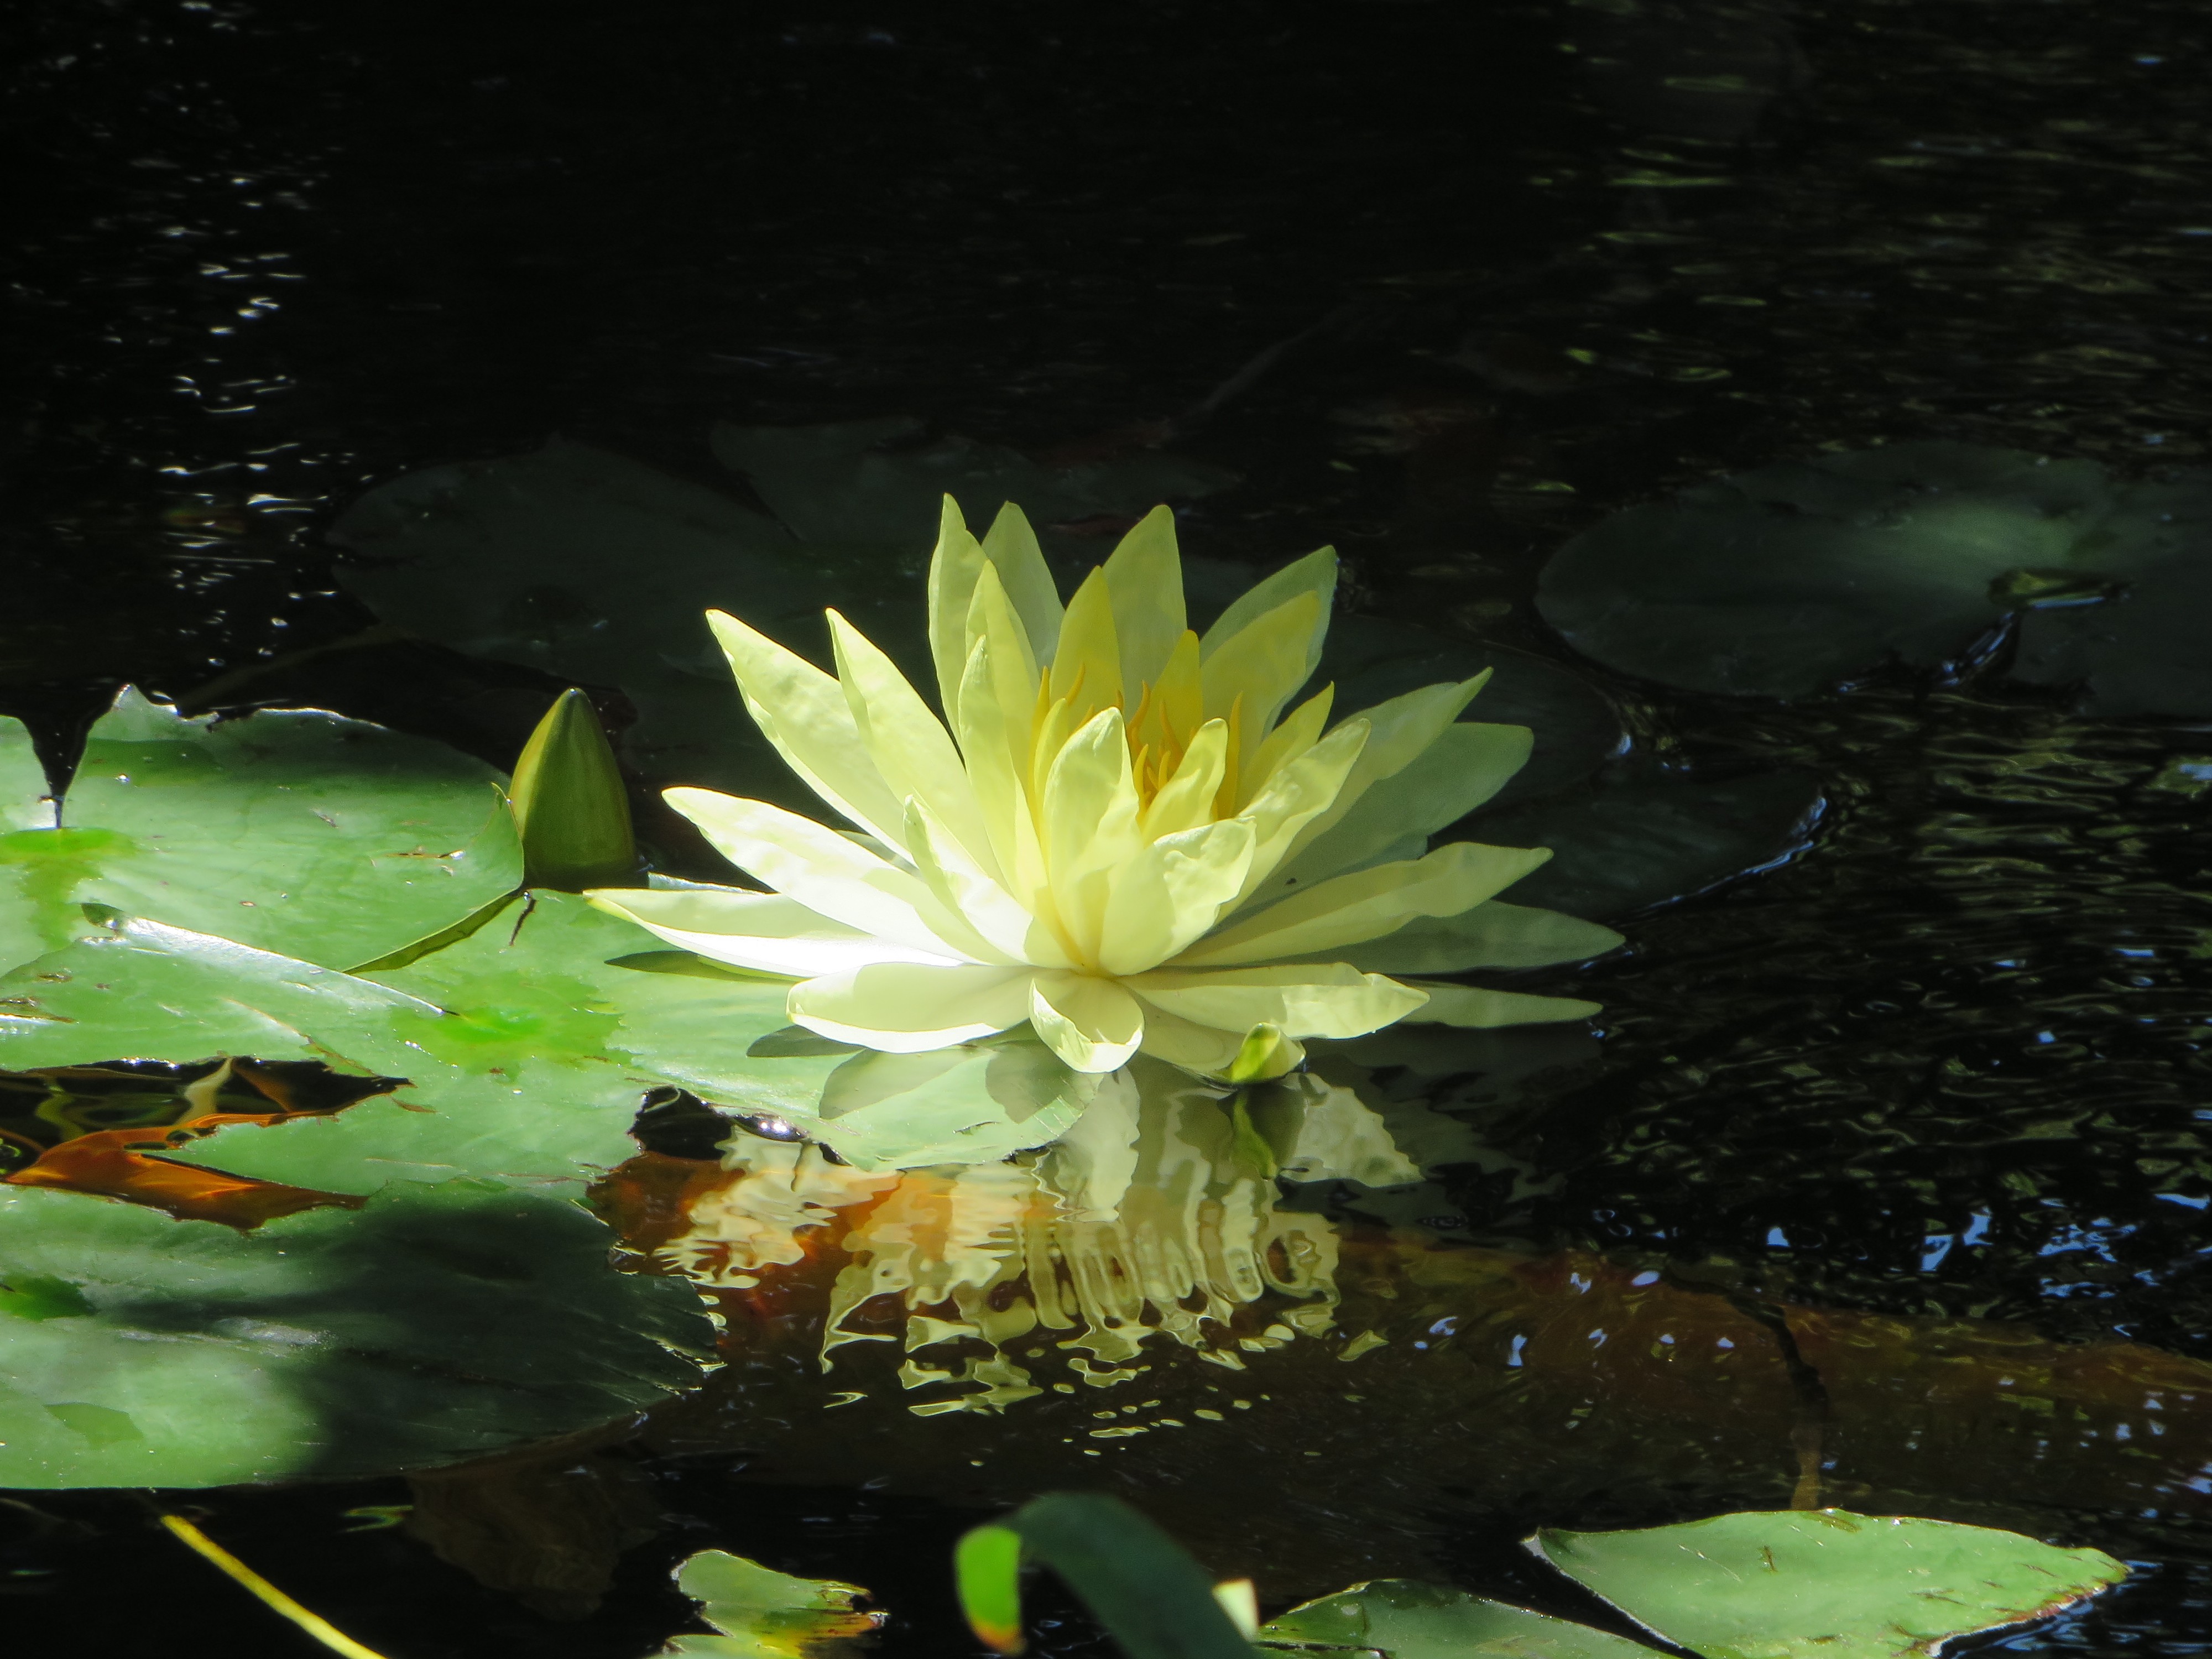 General 4000x3000 green water pond flowers water lilies lilies plants